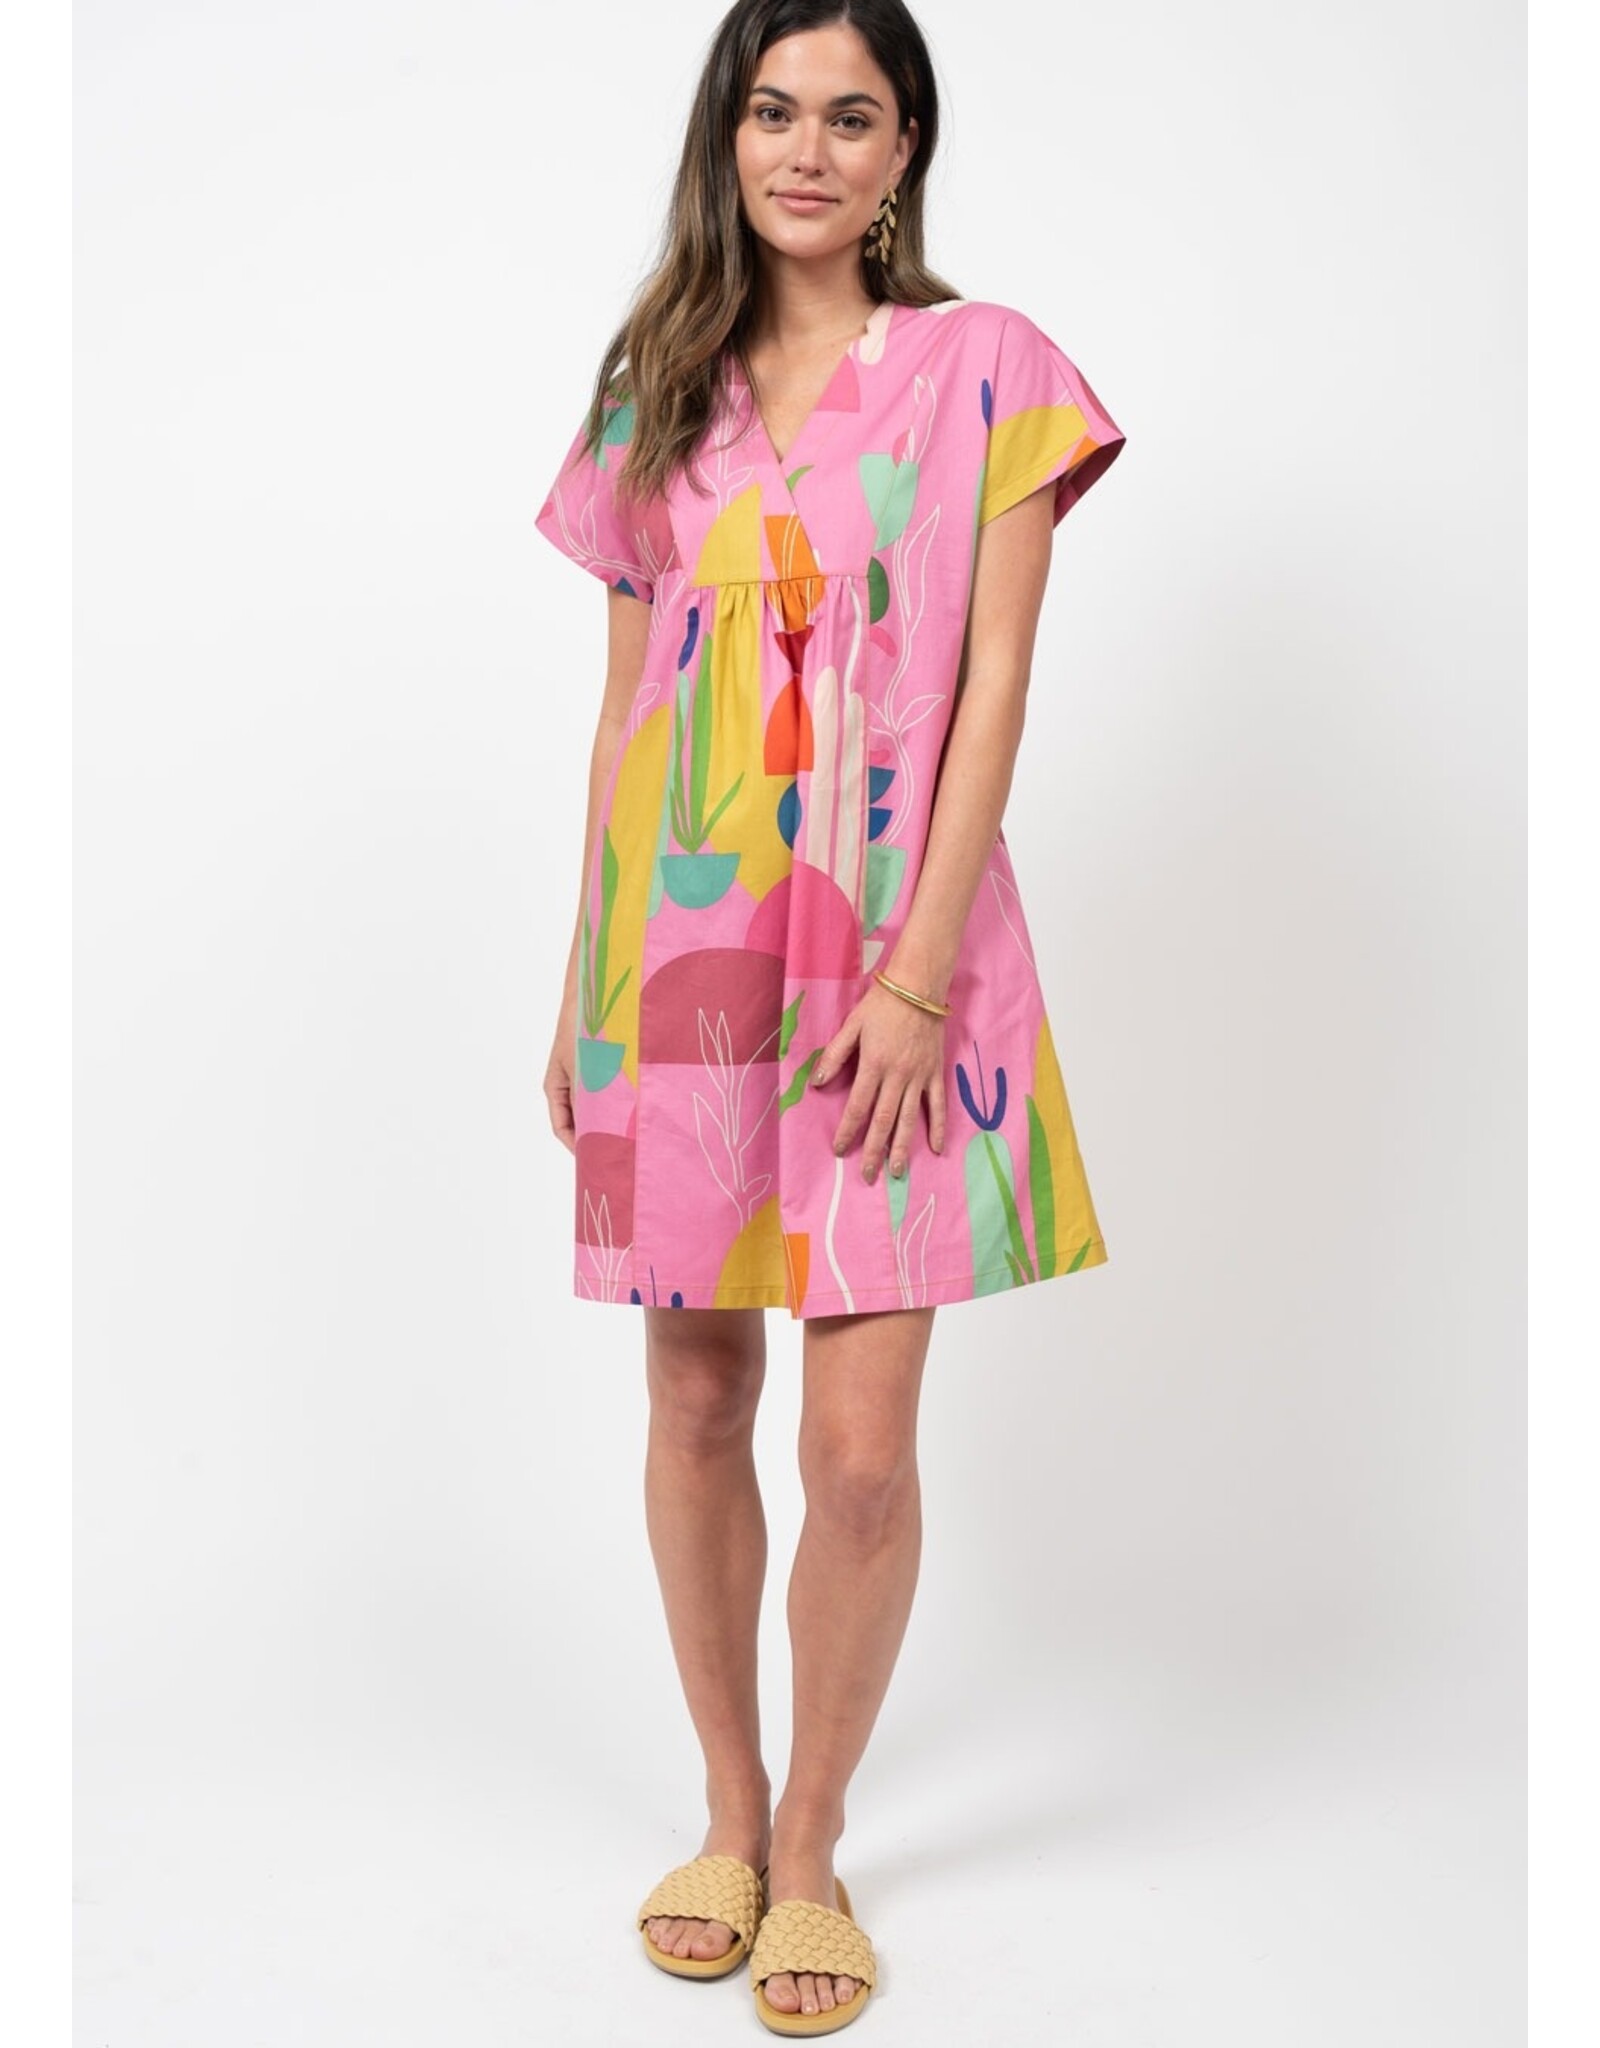 Uncle Frank Uncle Frank Modern Mexicana Dress